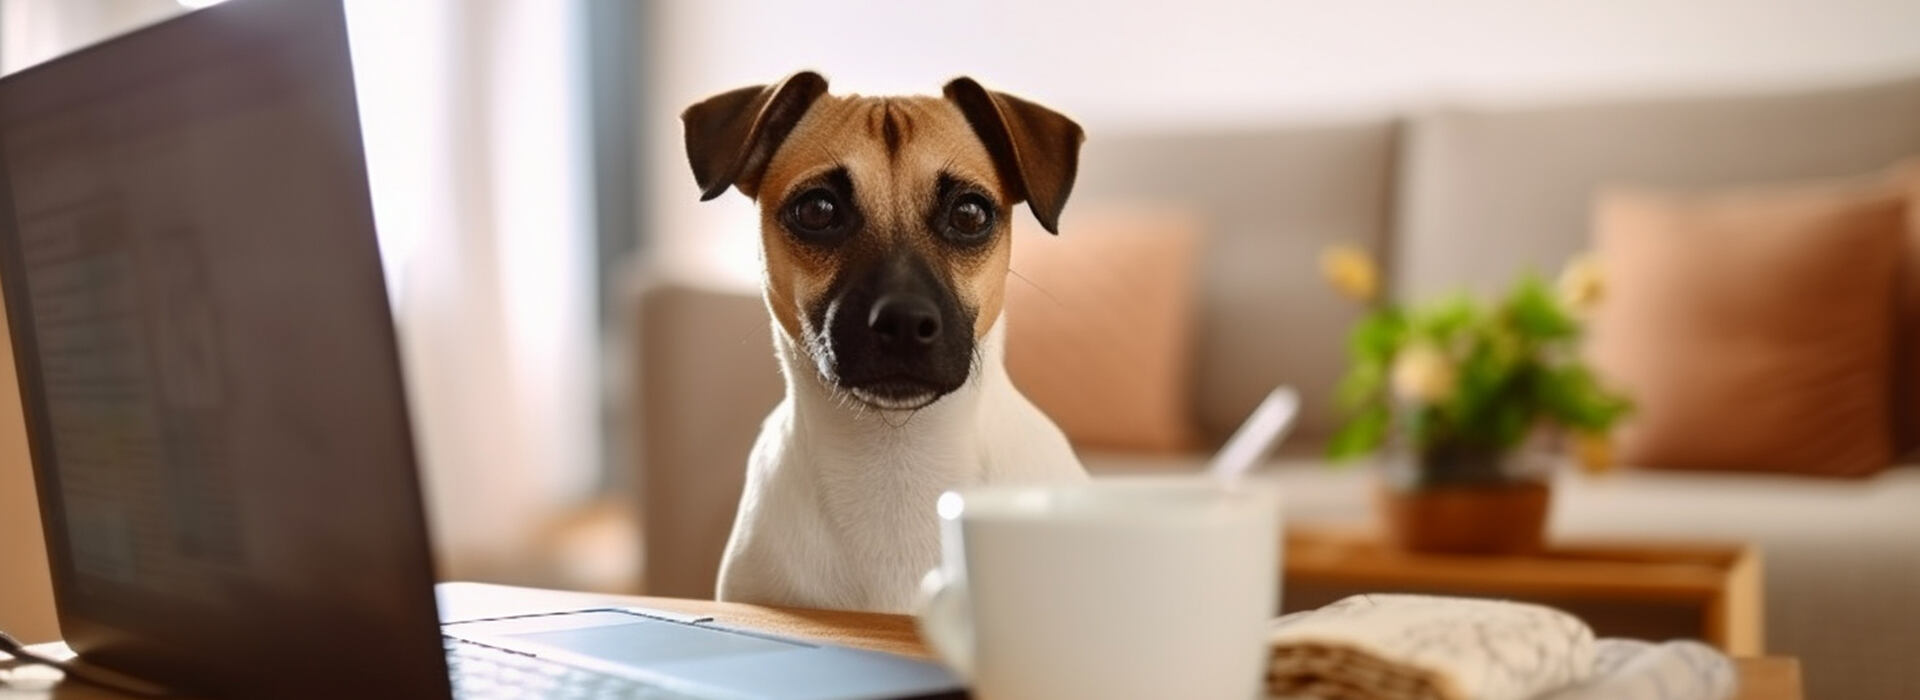 dog sits table with laptop and cup of coffee